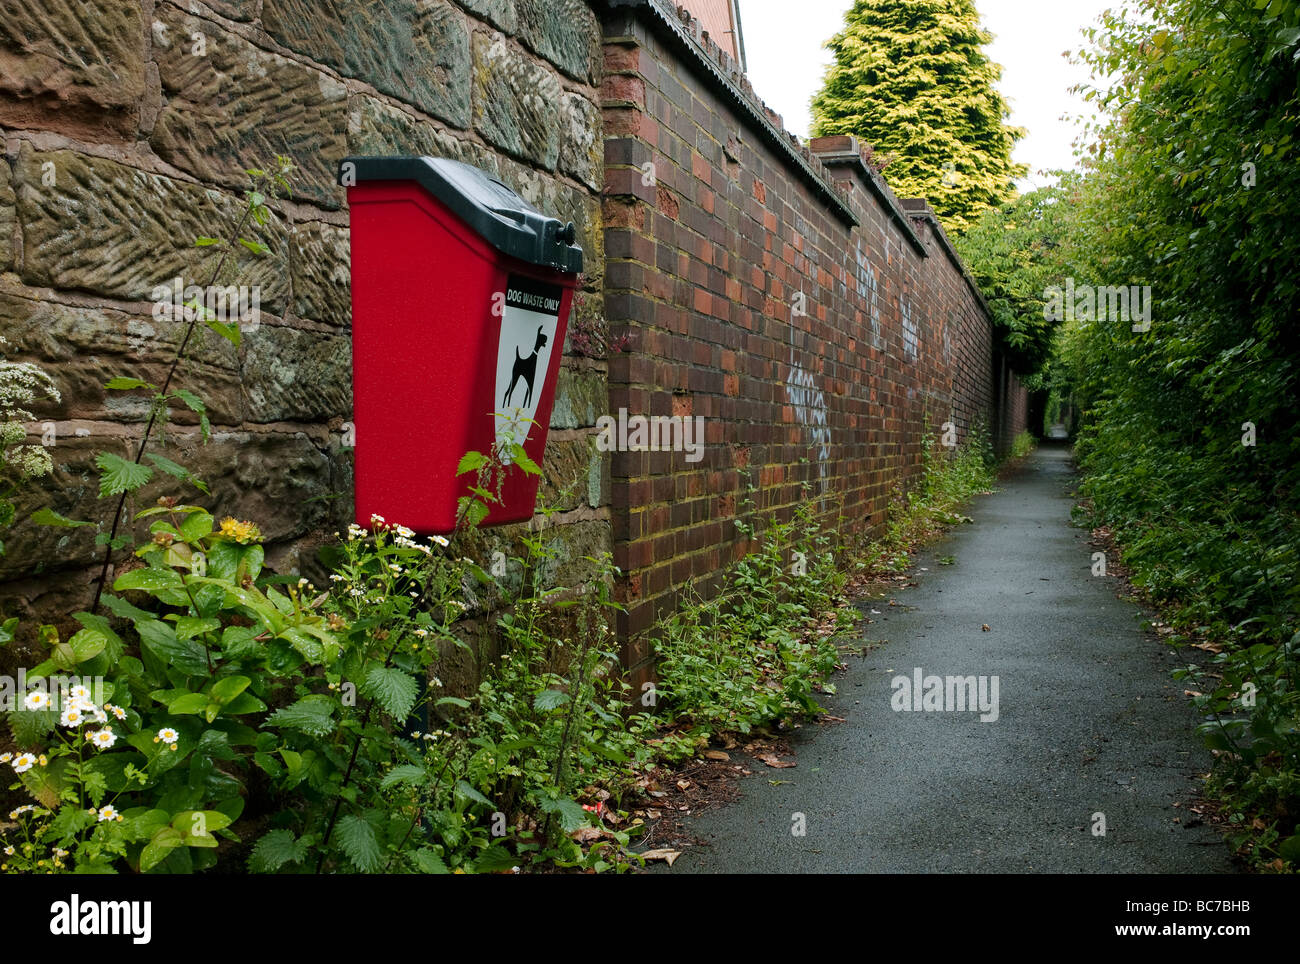 A bin for dog waste in an alley way in Bromsgrove, Worcestershire, UK Stock Photo